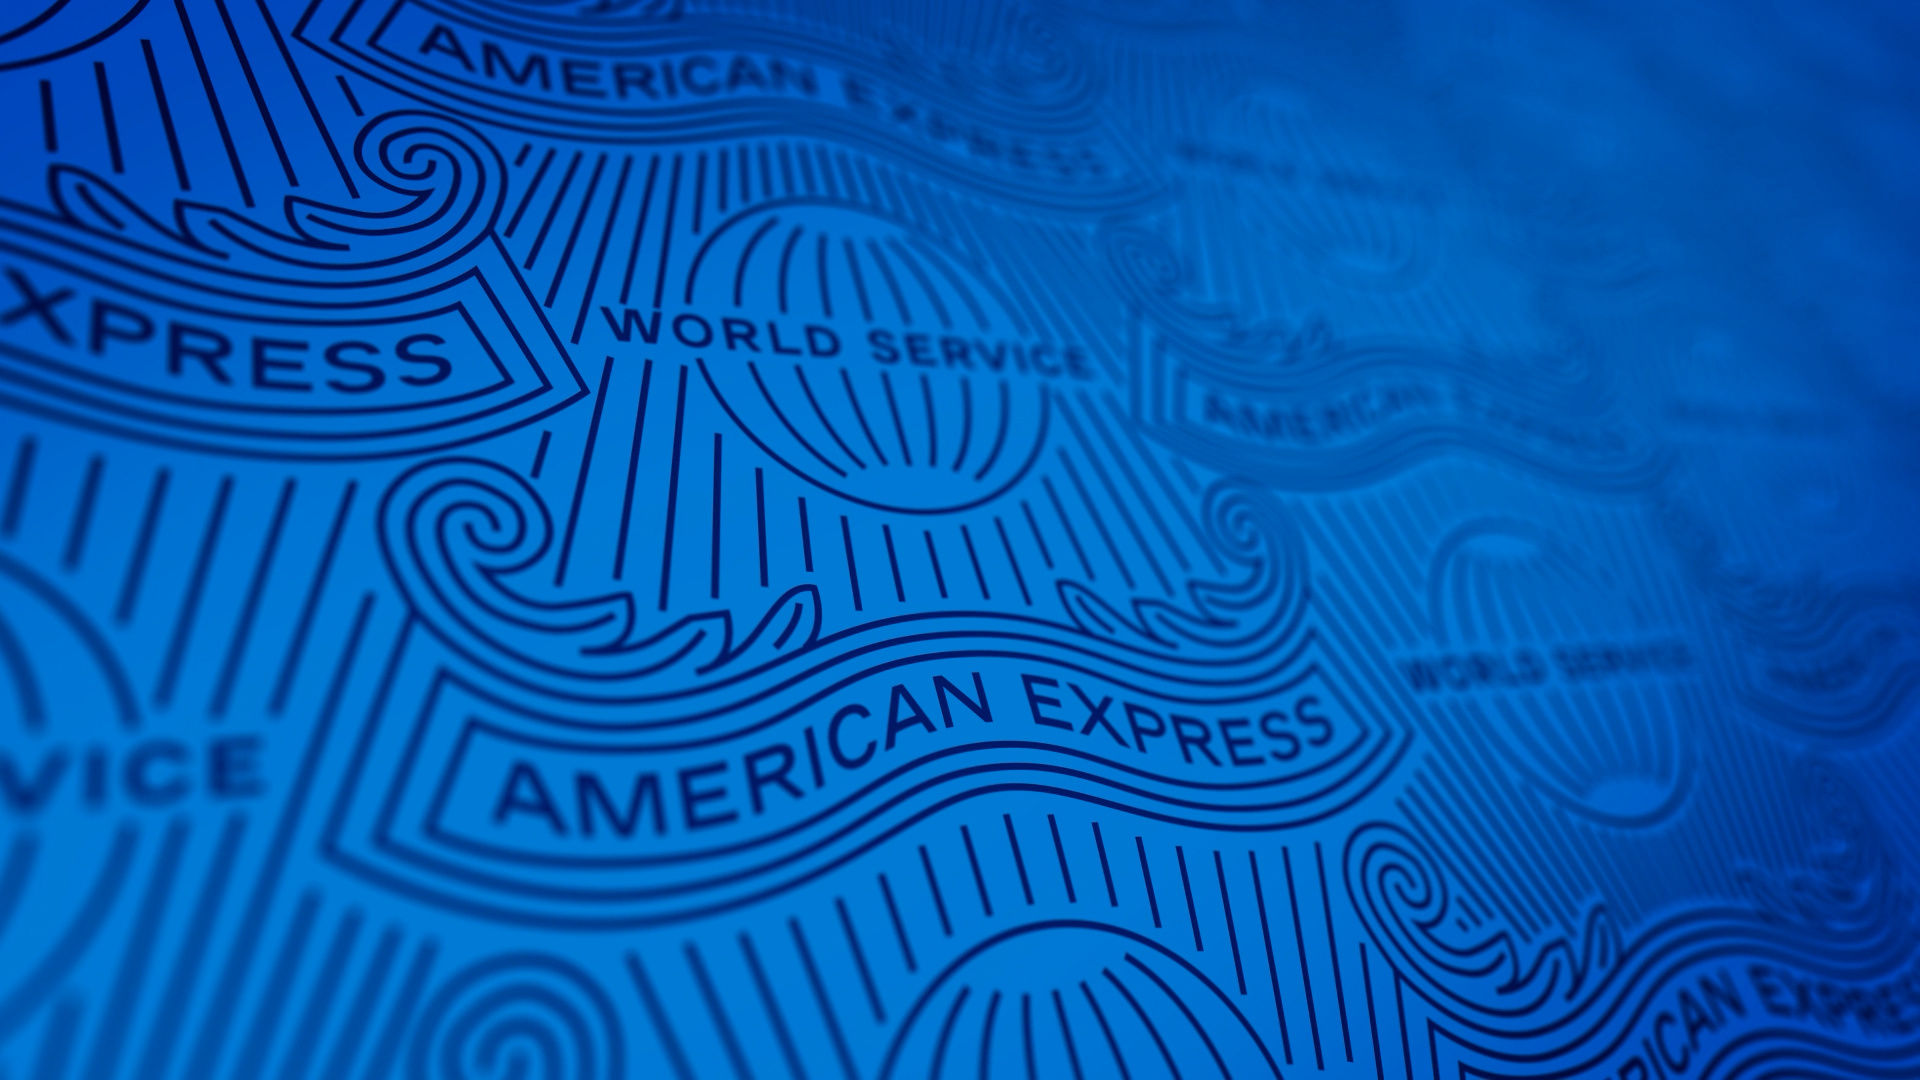 American Express: The company that issues cards and has a network to process card payments. 1920x1080 Full HD Background.